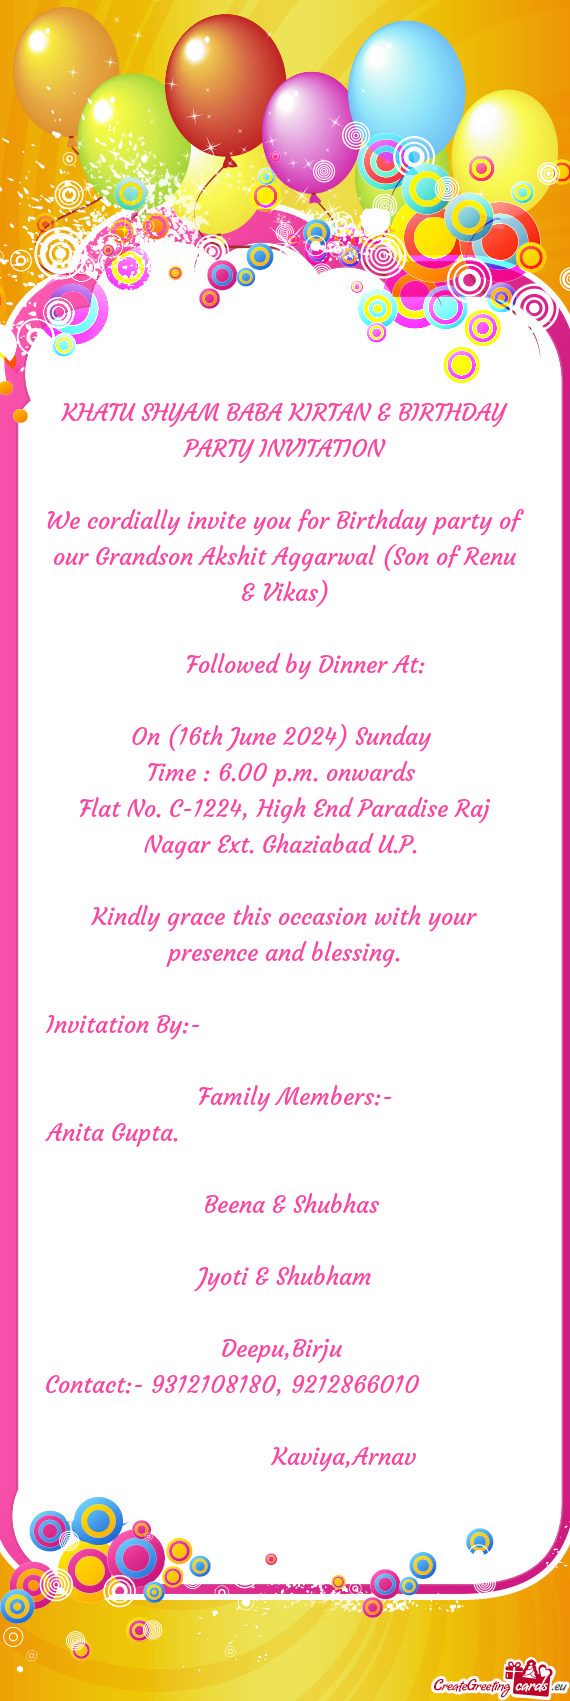 We cordially invite you for Birthday party of our Grandson Akshit Aggarwal (Son of Renu & Vikas)